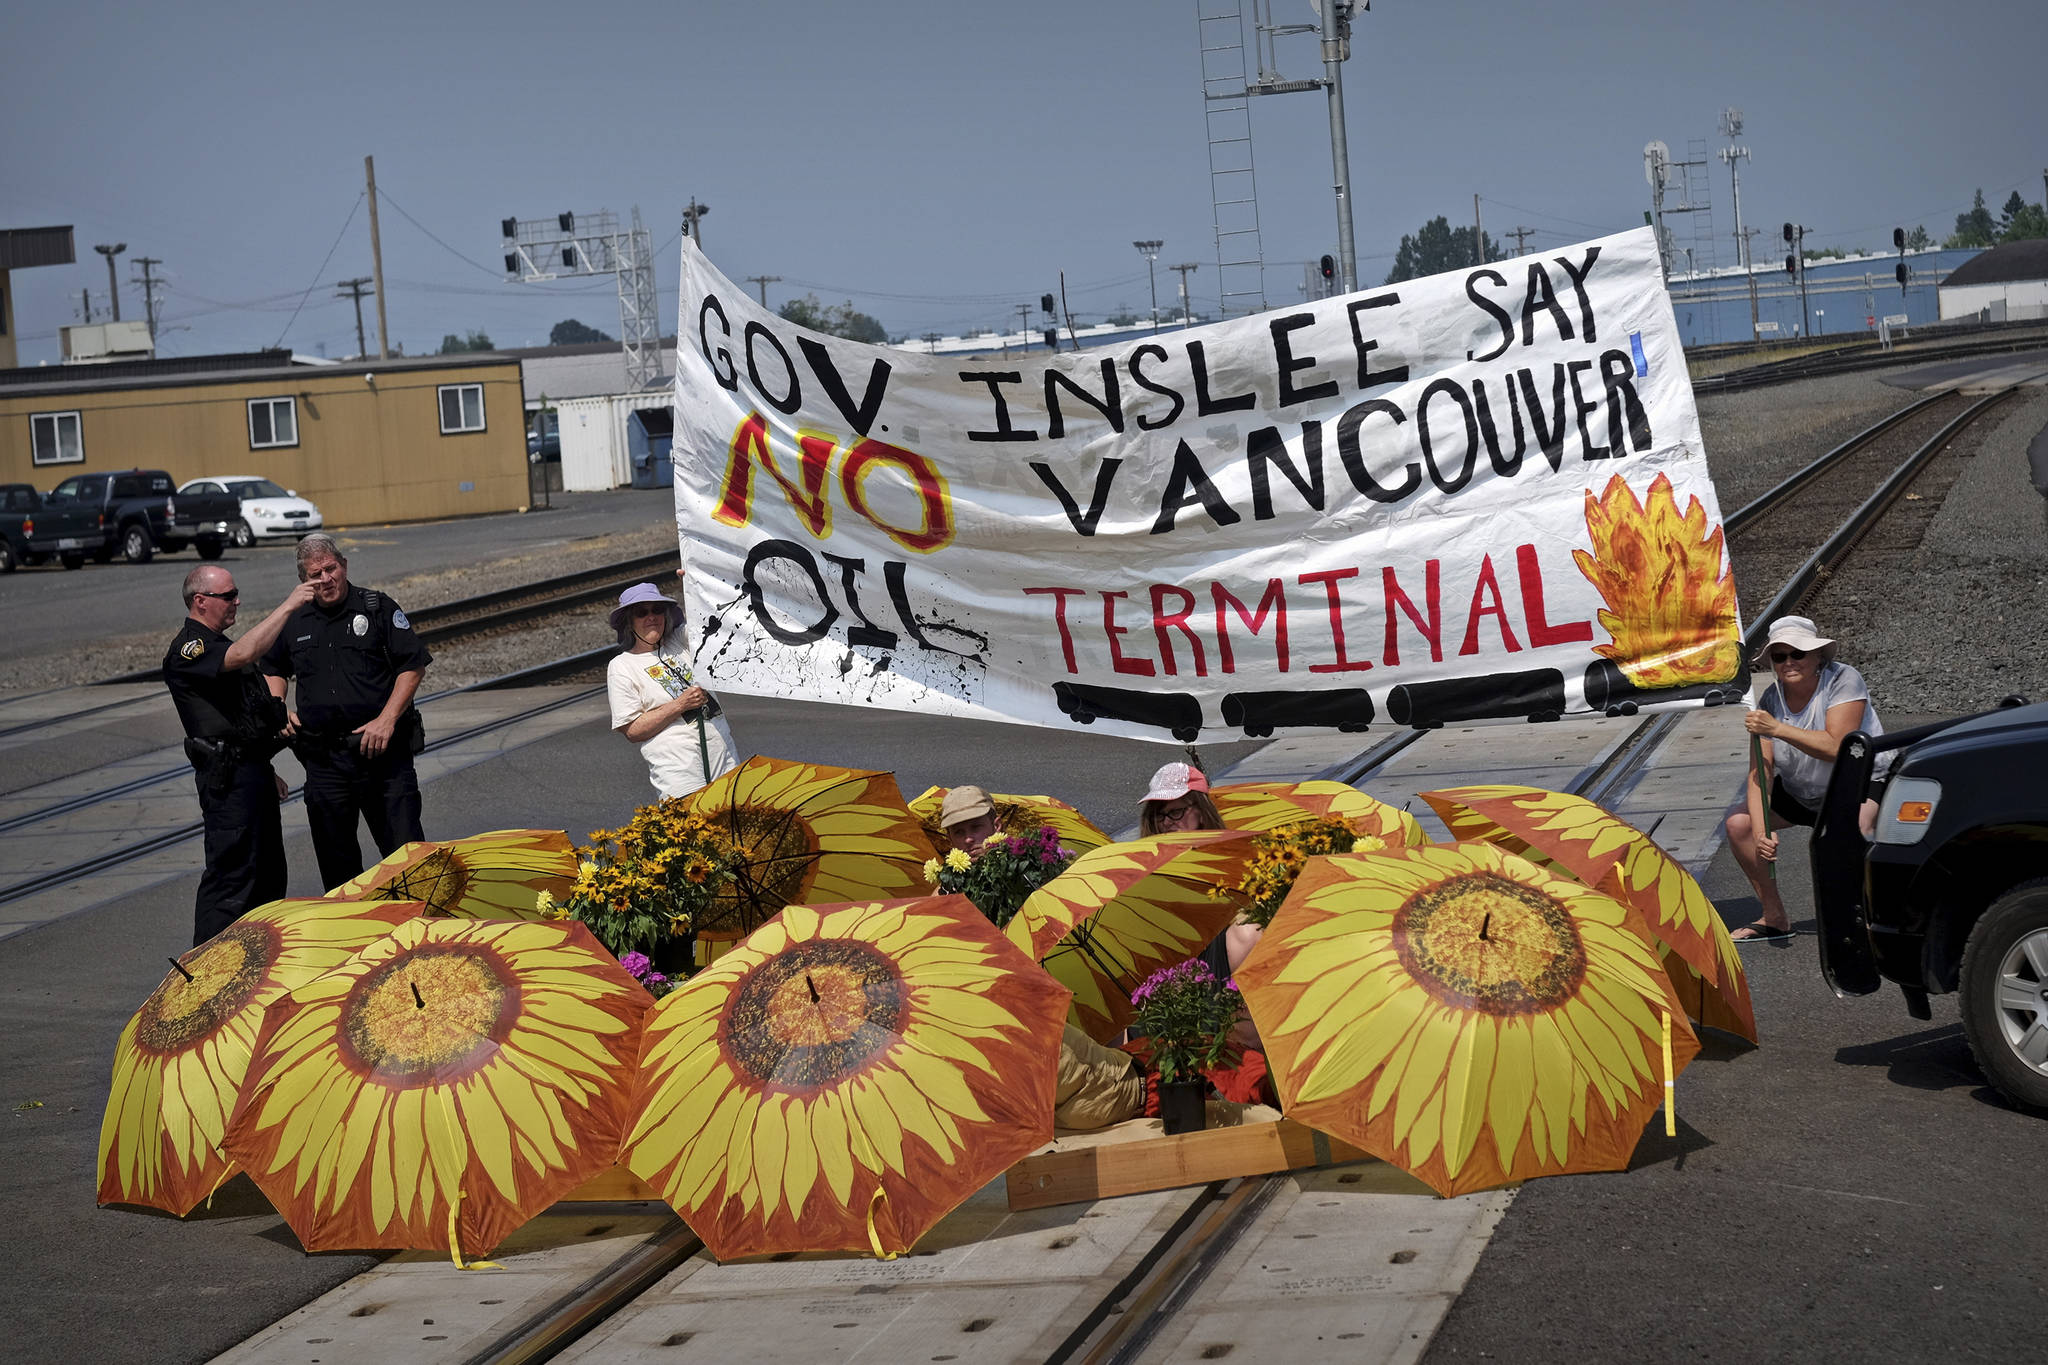 Protesters gather on the train tracks in Vancouver, Wash. Photo courtesy Shut Down Fossil Fuels